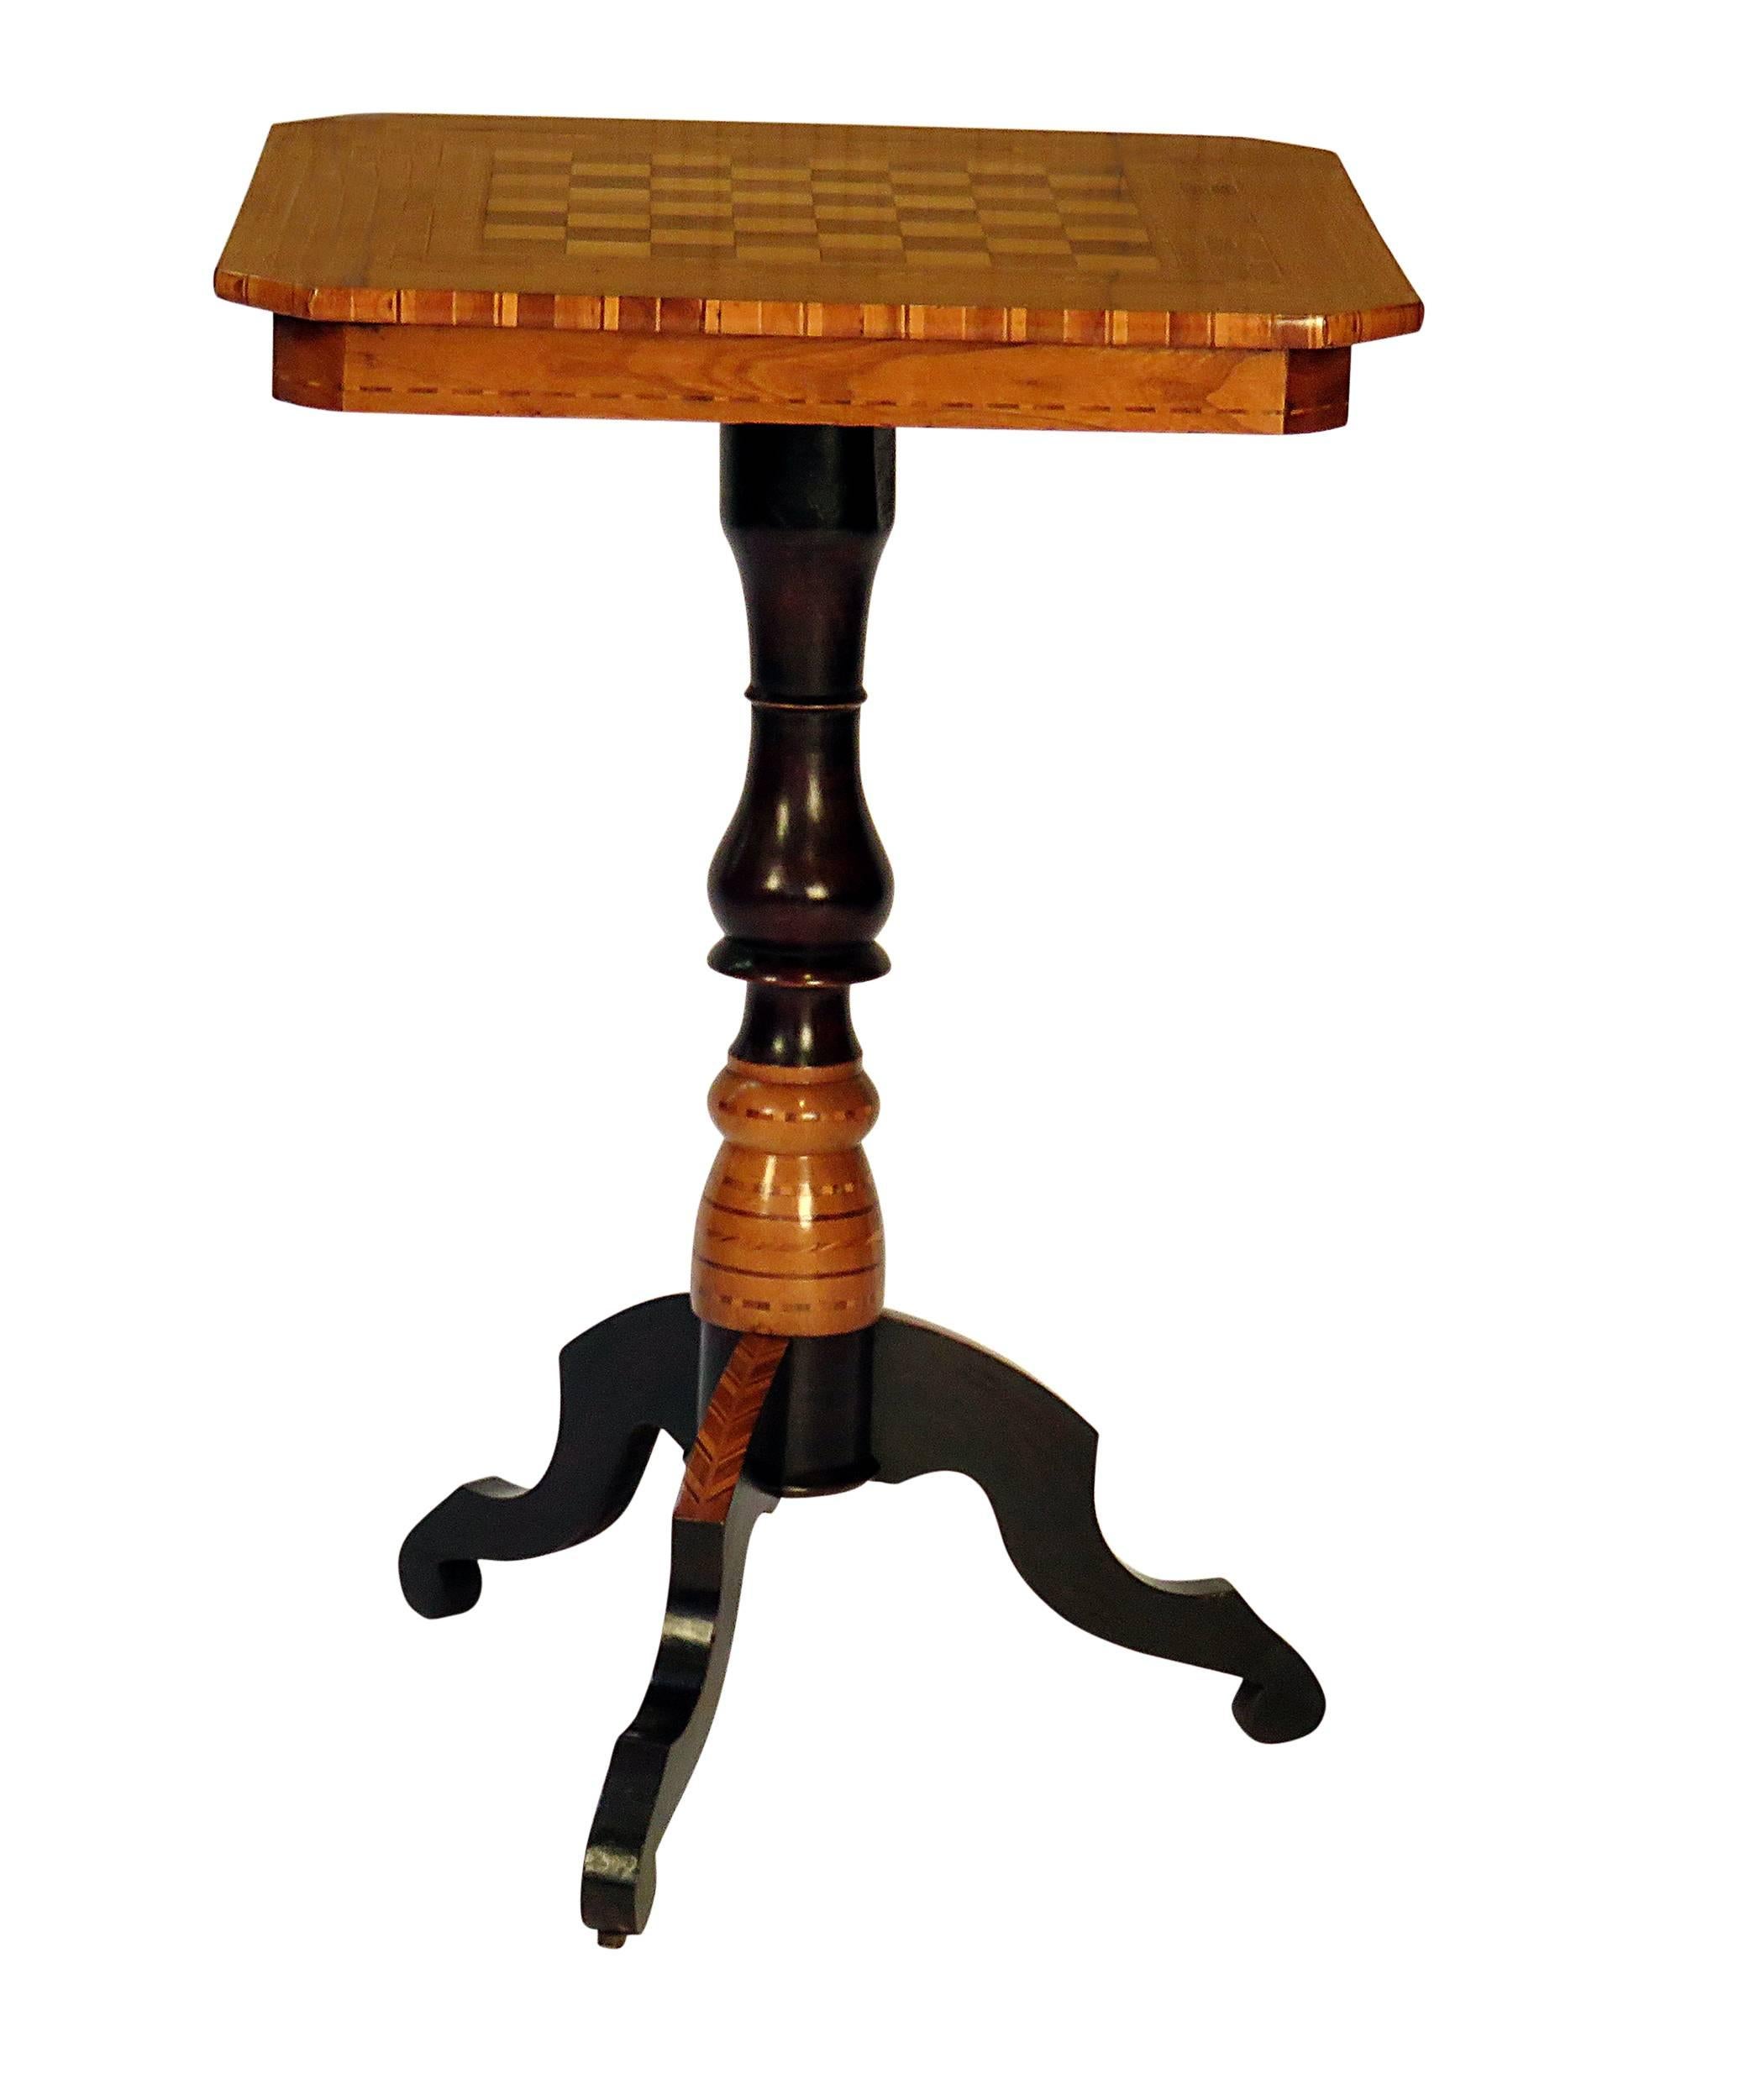 An inlaid Italian pedestal game table inlaid with a chess board. Mixed woods inlaid on poplar secondary woods. Probably made in or around Milan. A favorite souvenir of tourists in the late 19th century.